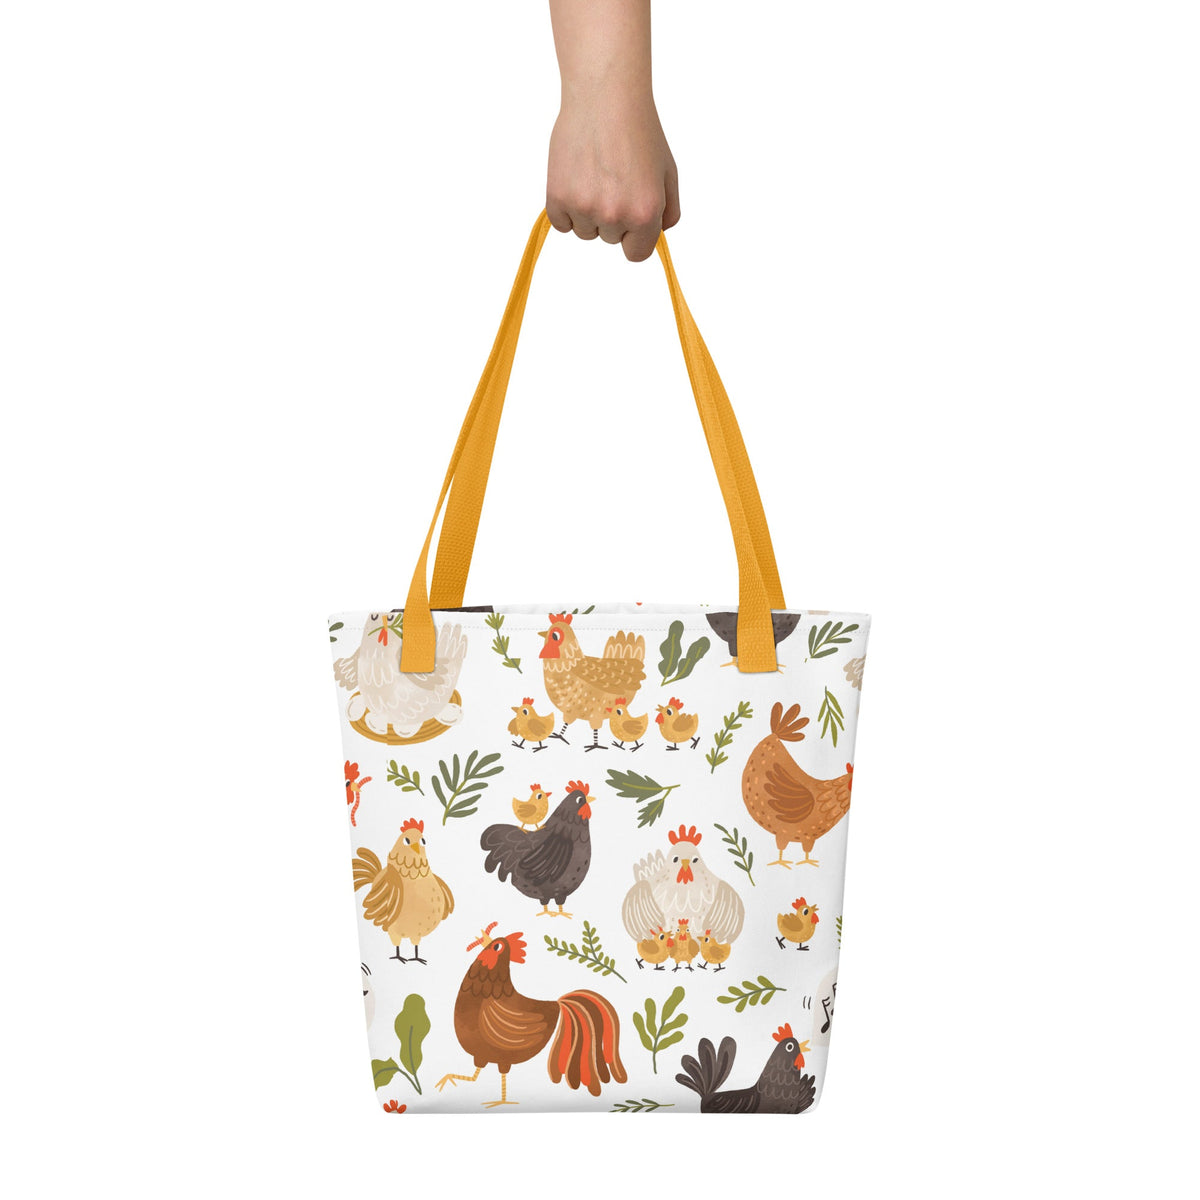 Whimsical Chicken Tote Bag - Cluck It All Farms